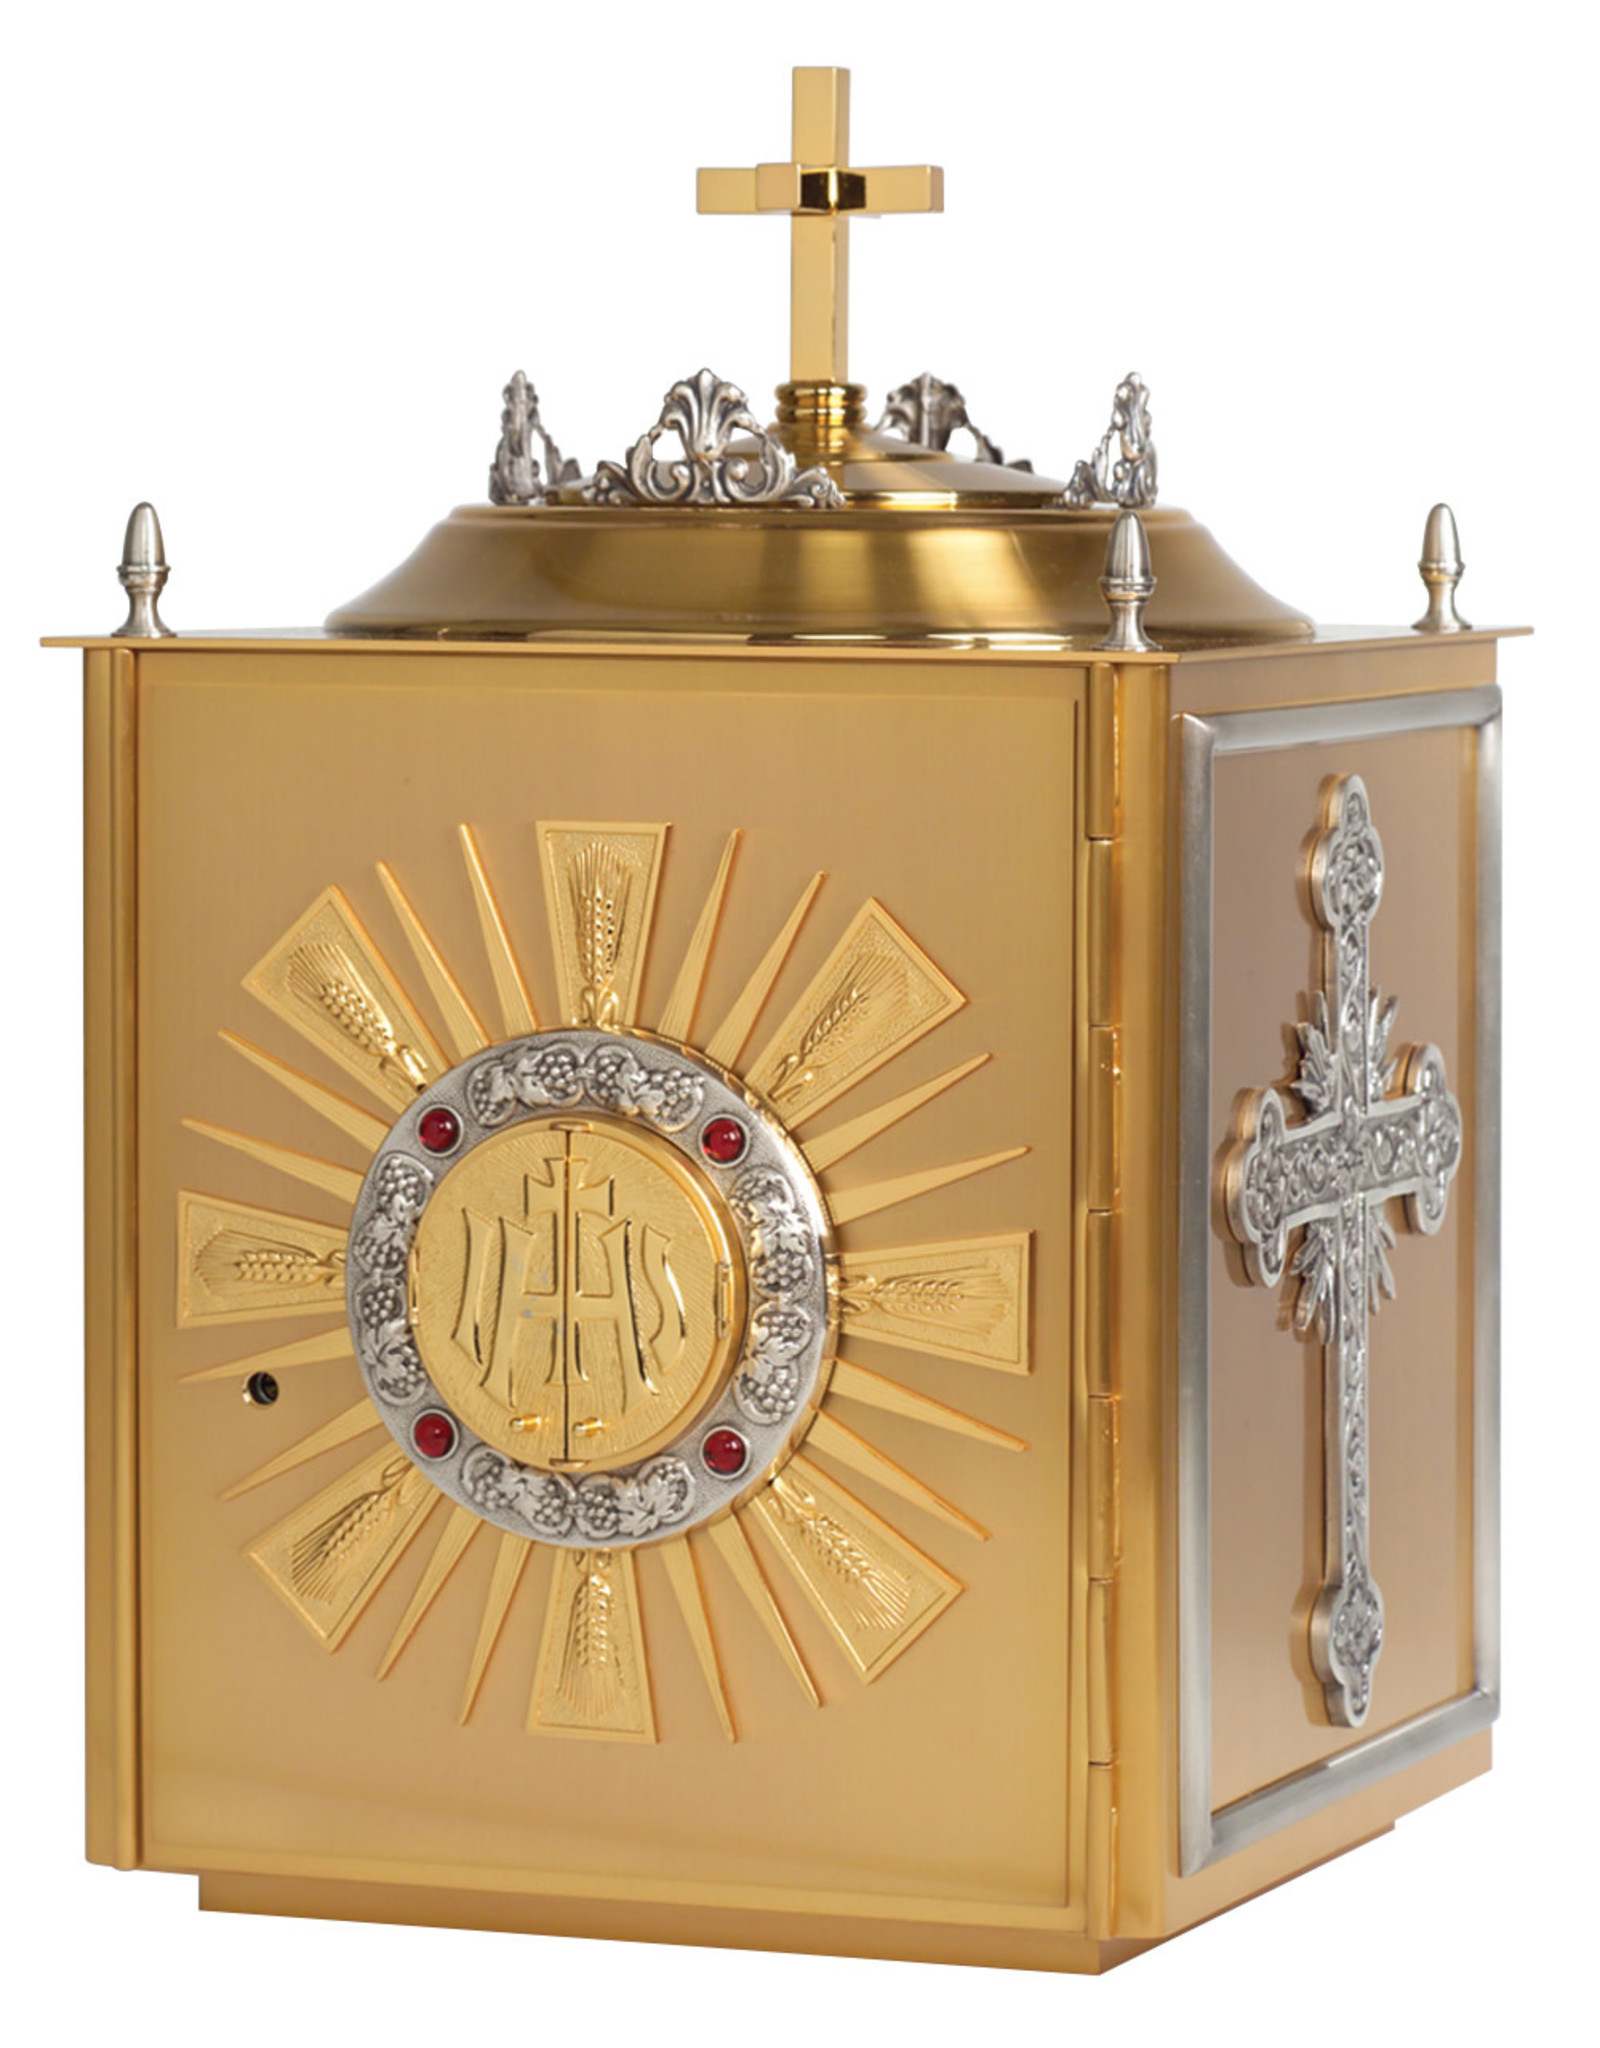 Tabernacle Gold Plated with Silver Plated Accents on Top and Side